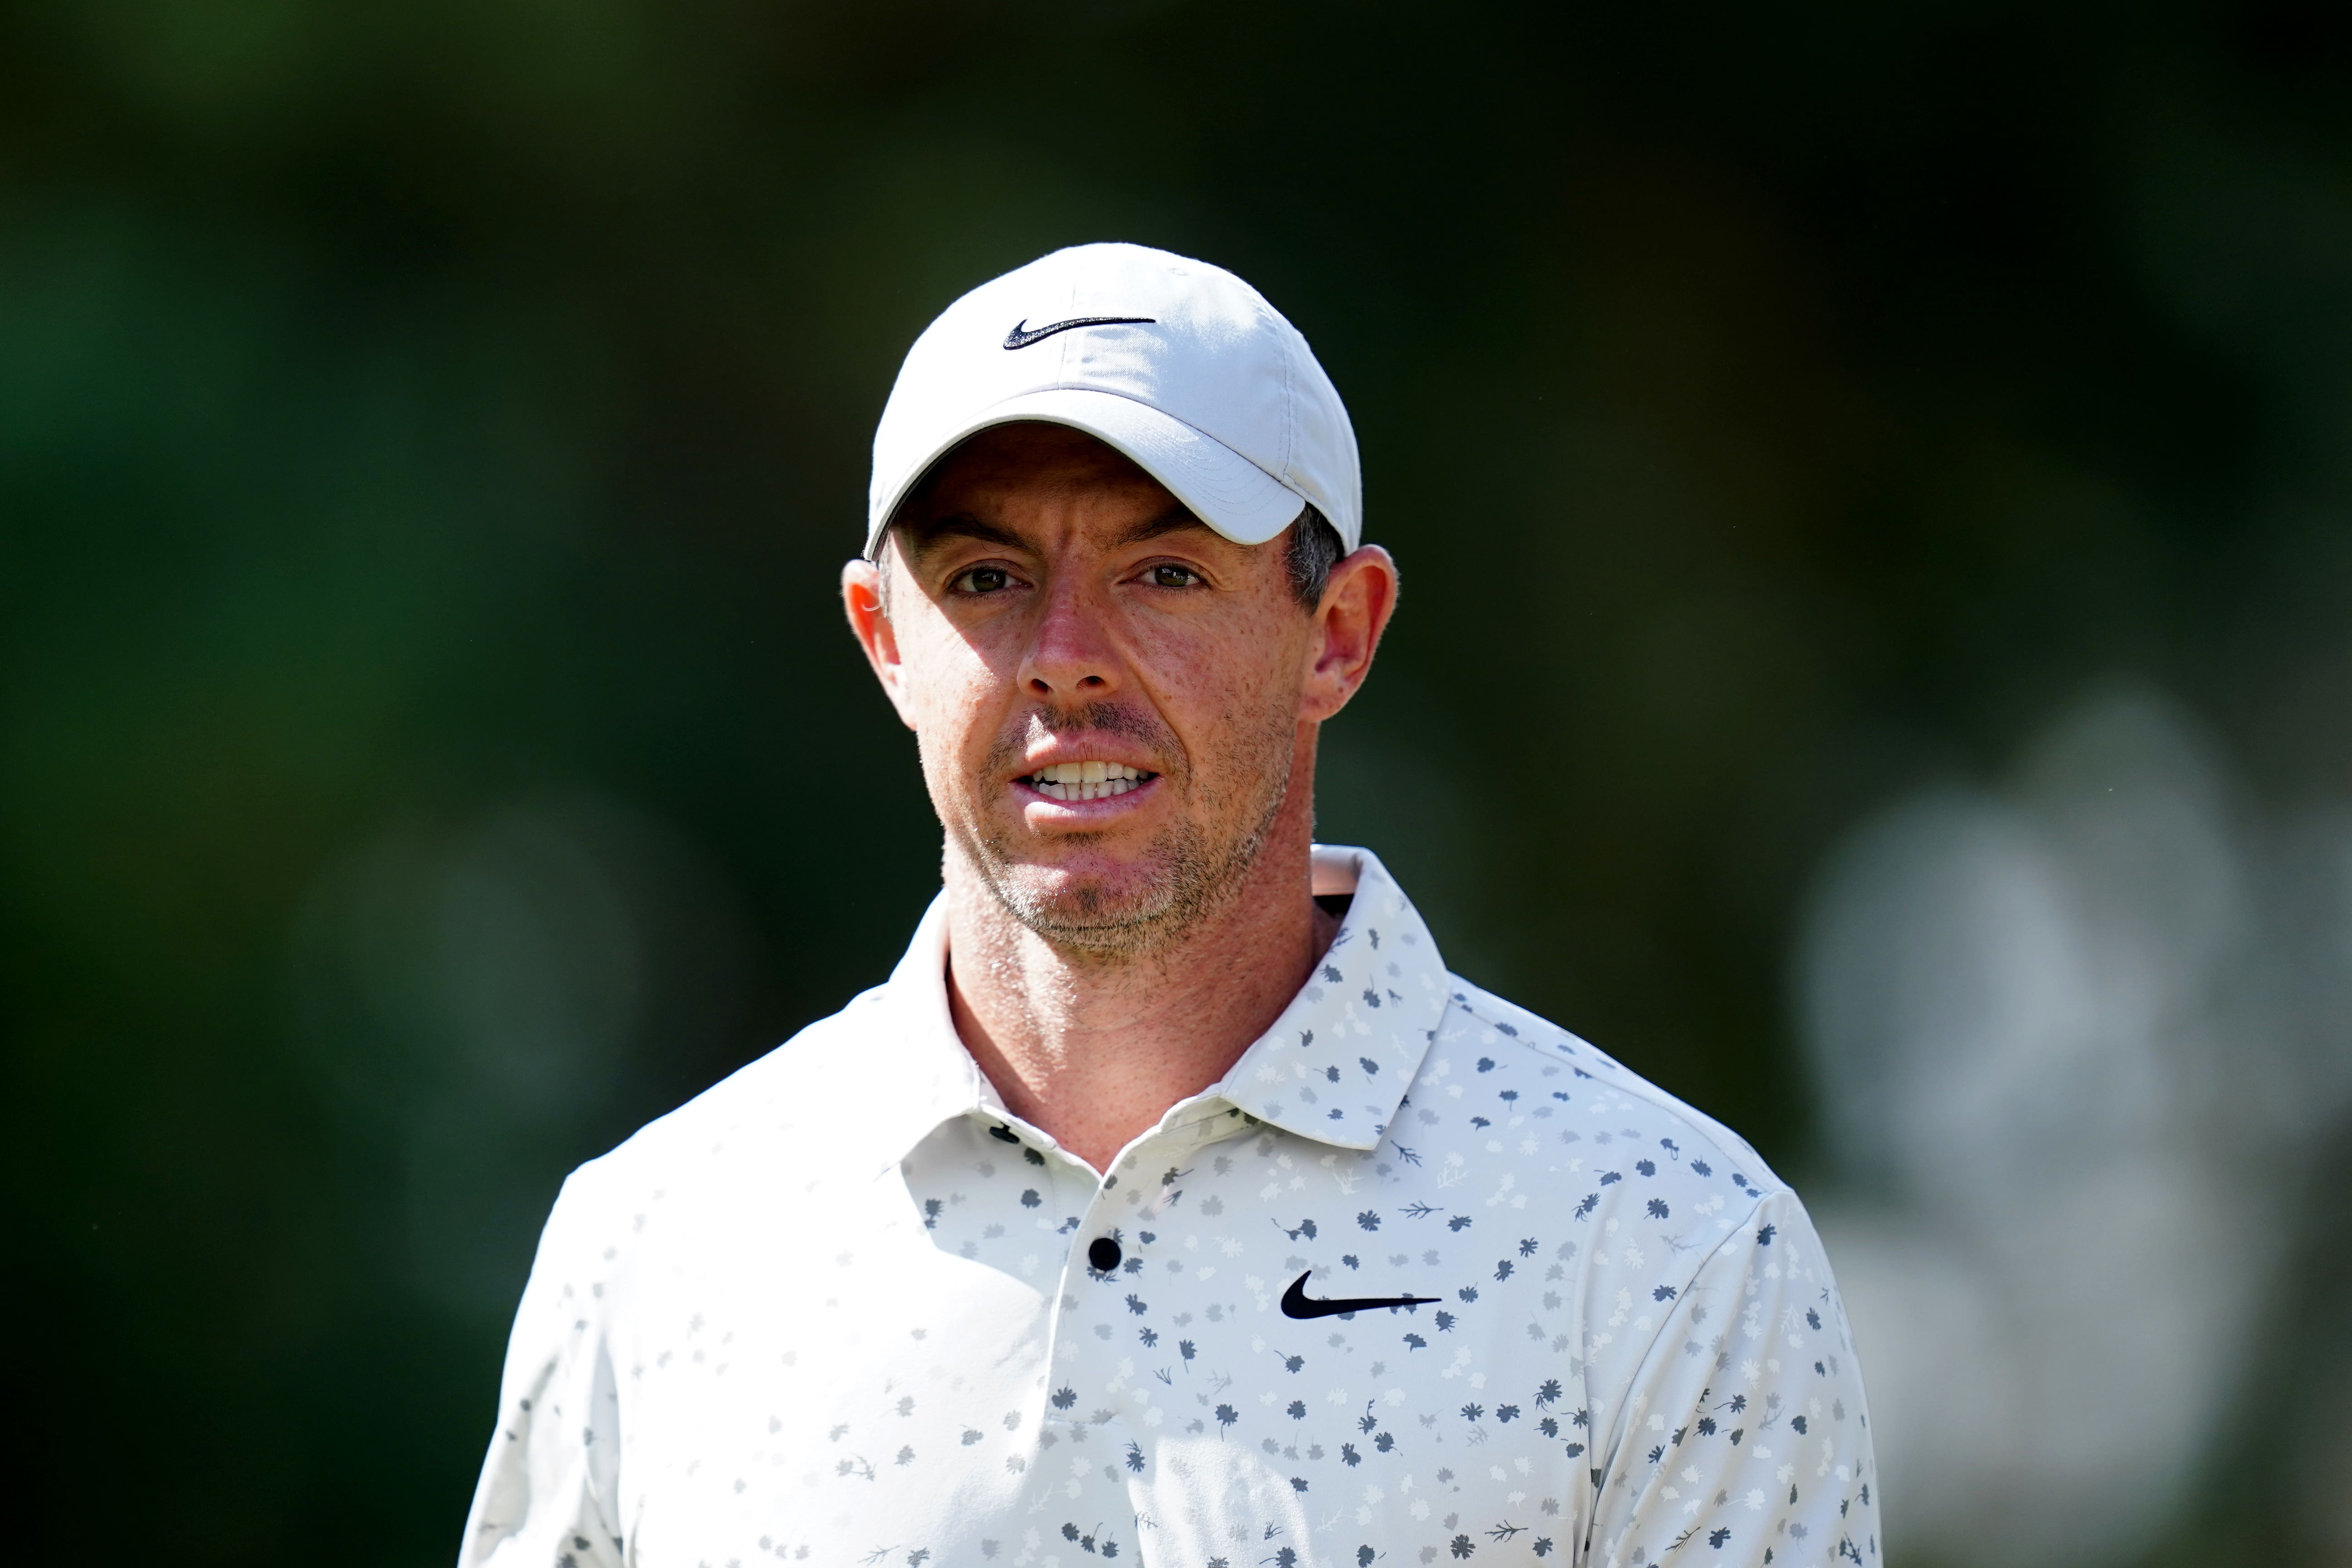 Rory McIlroy is one of golf’s biggest stars